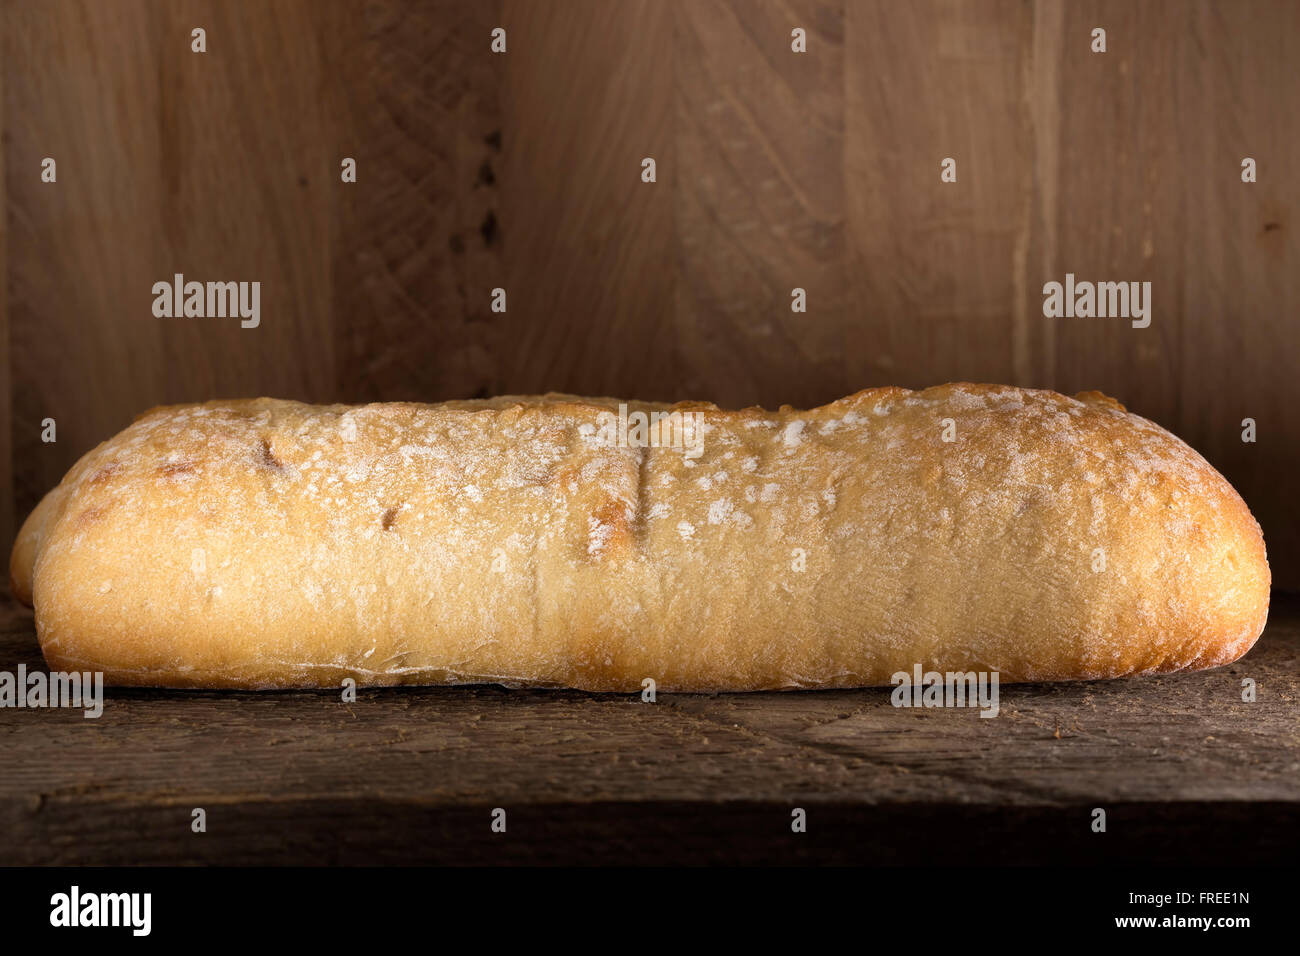 Loaf of bread on old rustic wooden background Stock Photo